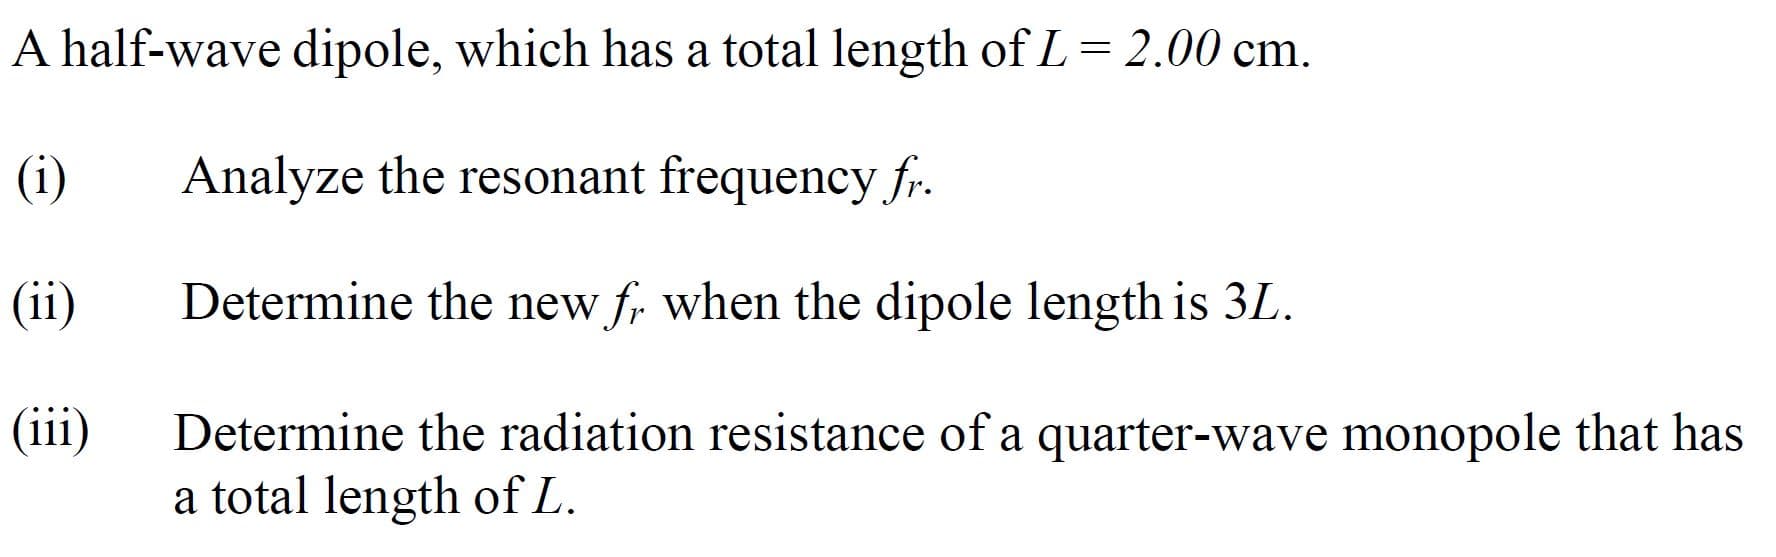 A half-wave dipole, which has a total length of L= 2.00 cm.
(i)
Analyze the resonant frequency fr.
(ii)
Determine the new f, when the dipole length is 3L.
(iii)
Determine the radiation resistance of a quarter-wave monopole that has
a total length of L.
